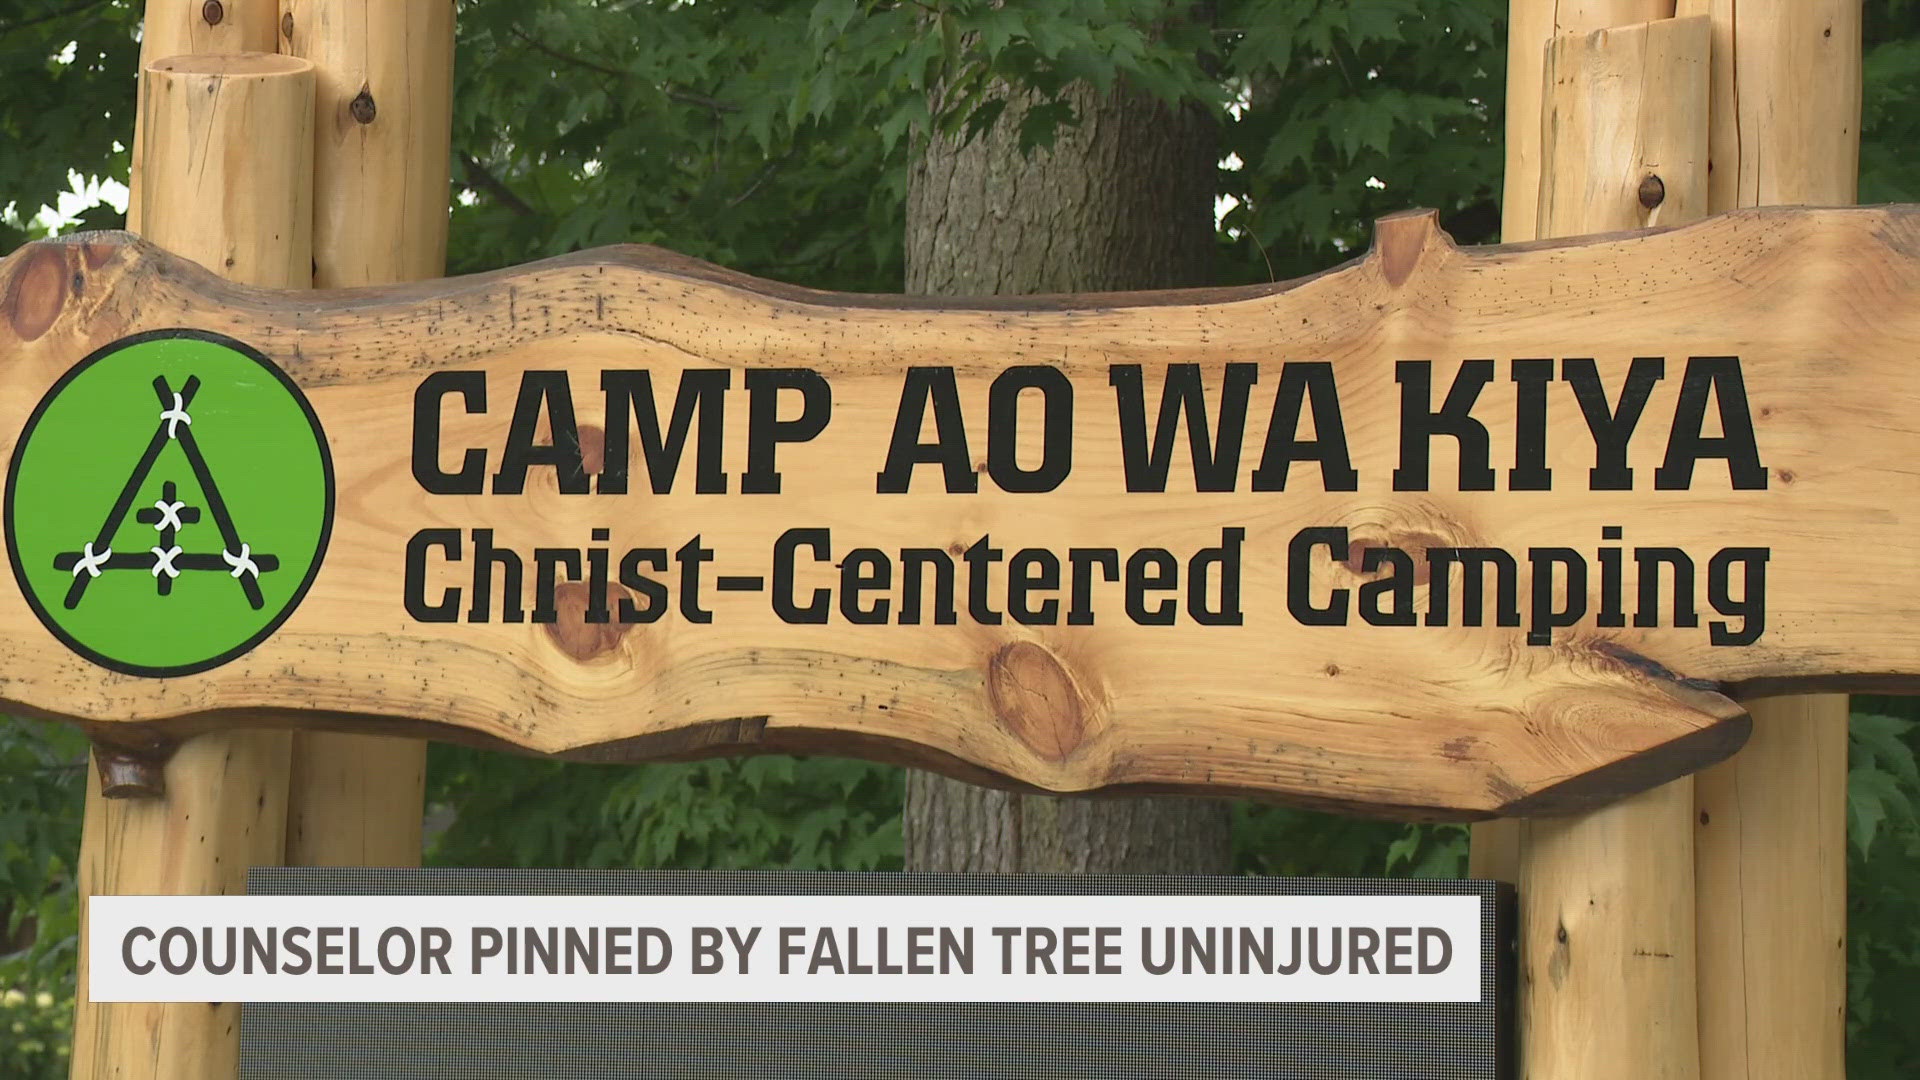 Camp Ao Wa Kiya in Oceana County said the counselor and the students inside the cabin are back to enjoying their camp activities.